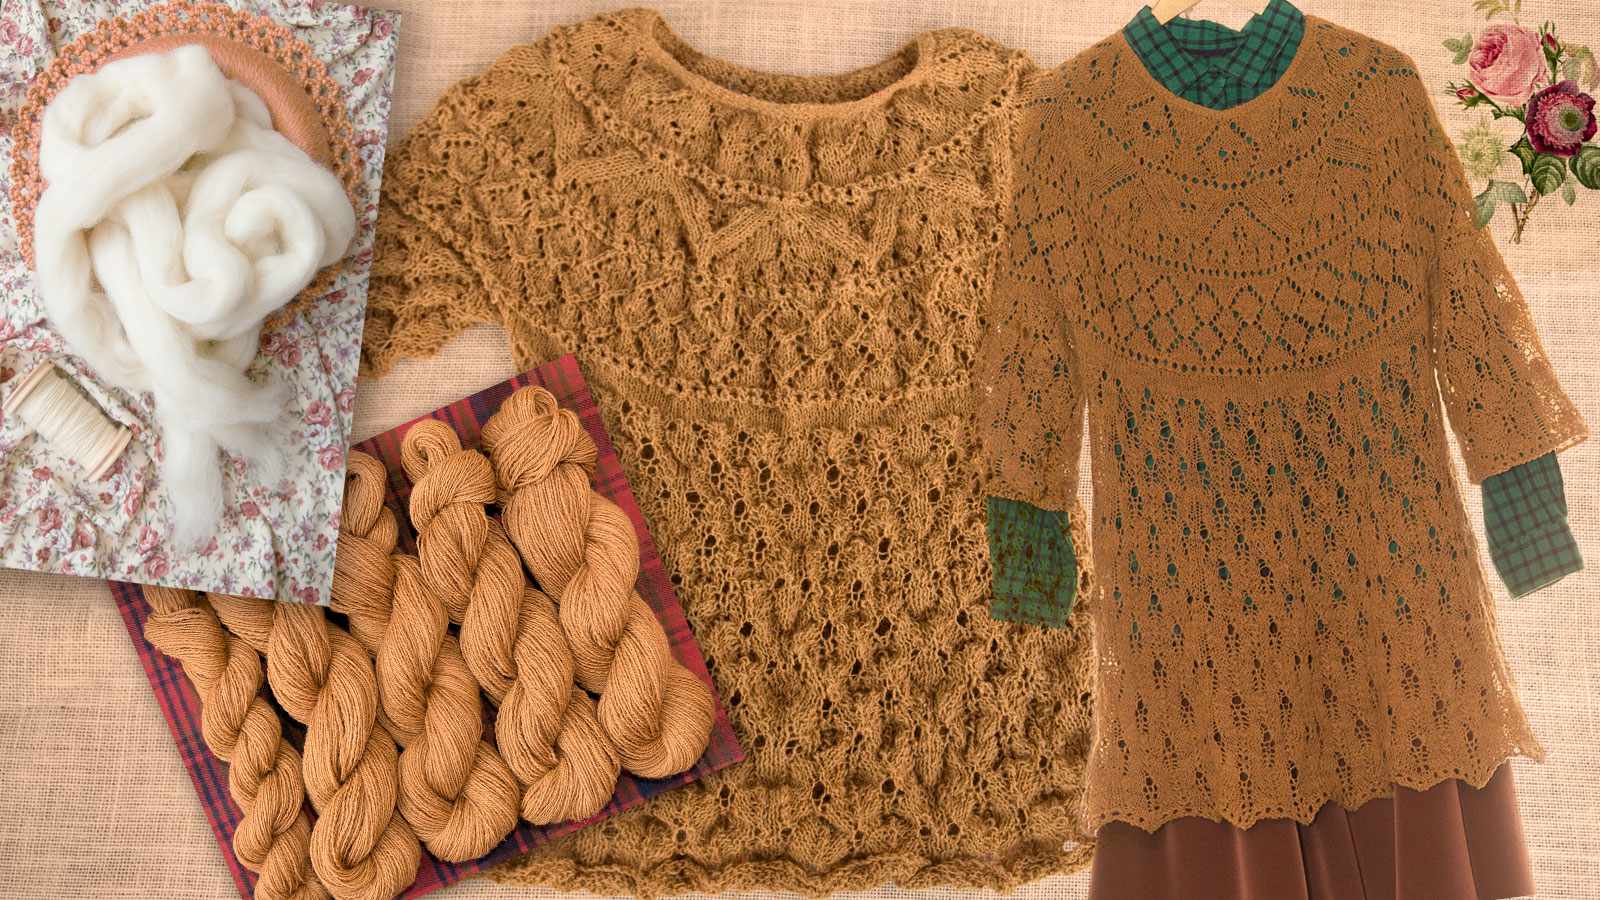 Handspun and Hand-knitted Hickory-dyed Lace Tunic